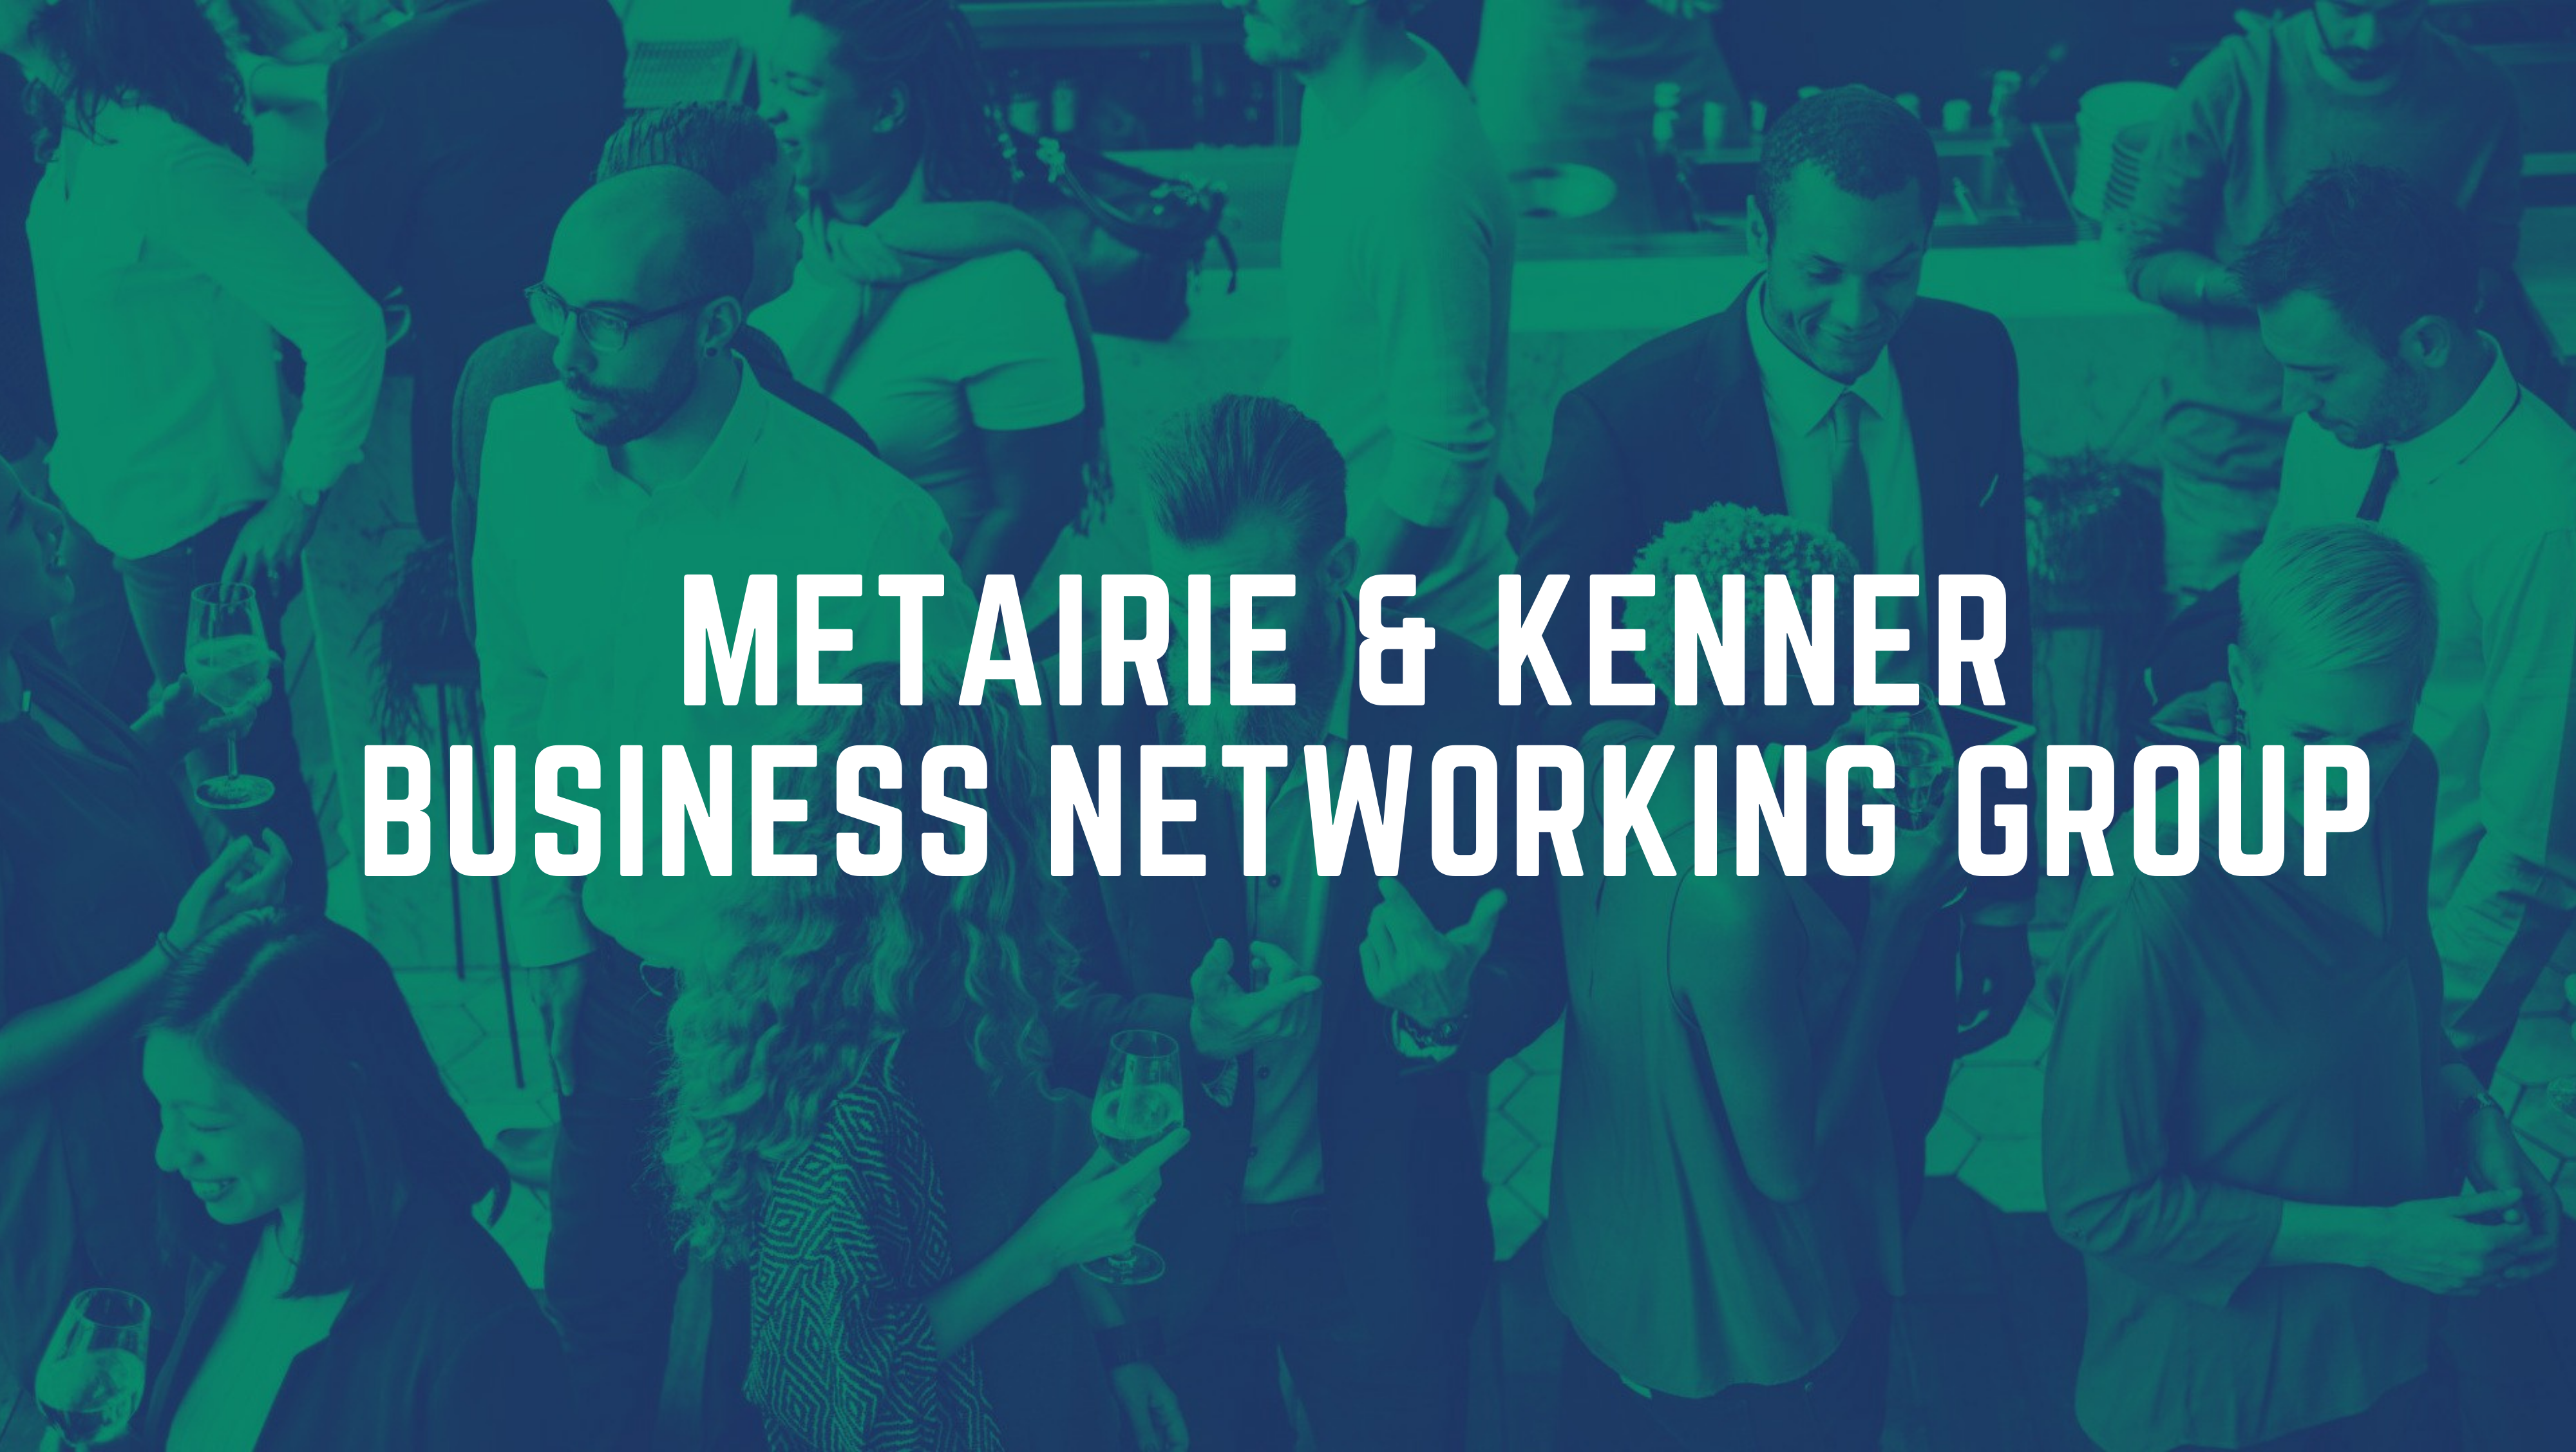 Metairie & Kenner Business Networking Group